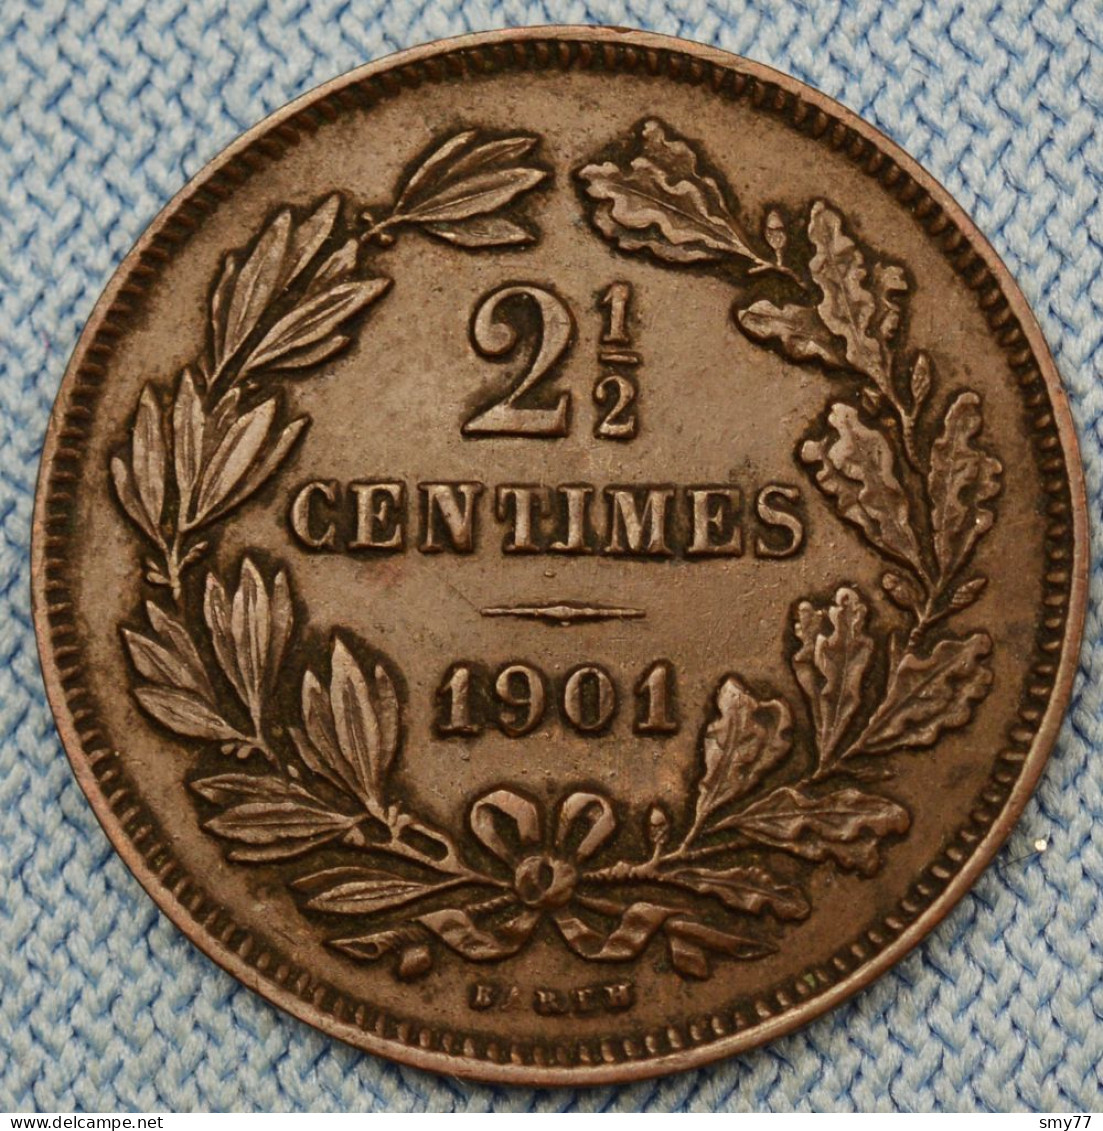 Luxembourg • 2 1/2 Centimes 1901 • SUP / XF+  • B_RTH - Error - A Almost Absent • Luxemburg •  [24-573] - Luxemburg